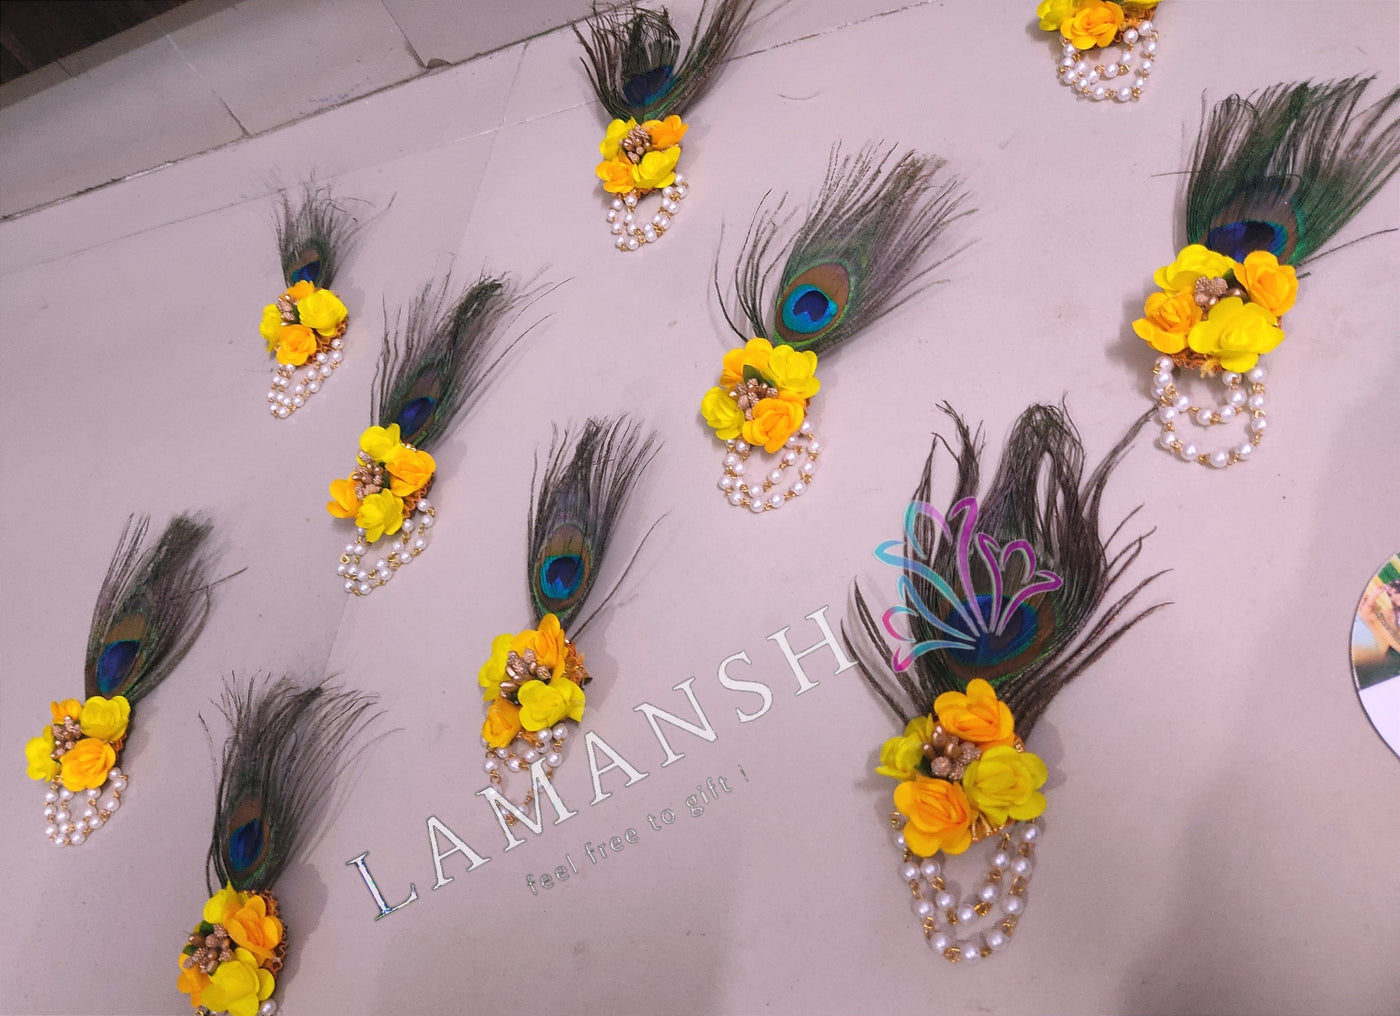 LAMANSH Floral 🌺 Giveaways Yellow / Set of 20 Broaches LAMANSH® Artificial Flower Brooches Broaches for Guests in Wedding & other events / Bridesmaid Giveaways Favours ✨ for haldi mehendi sangeet